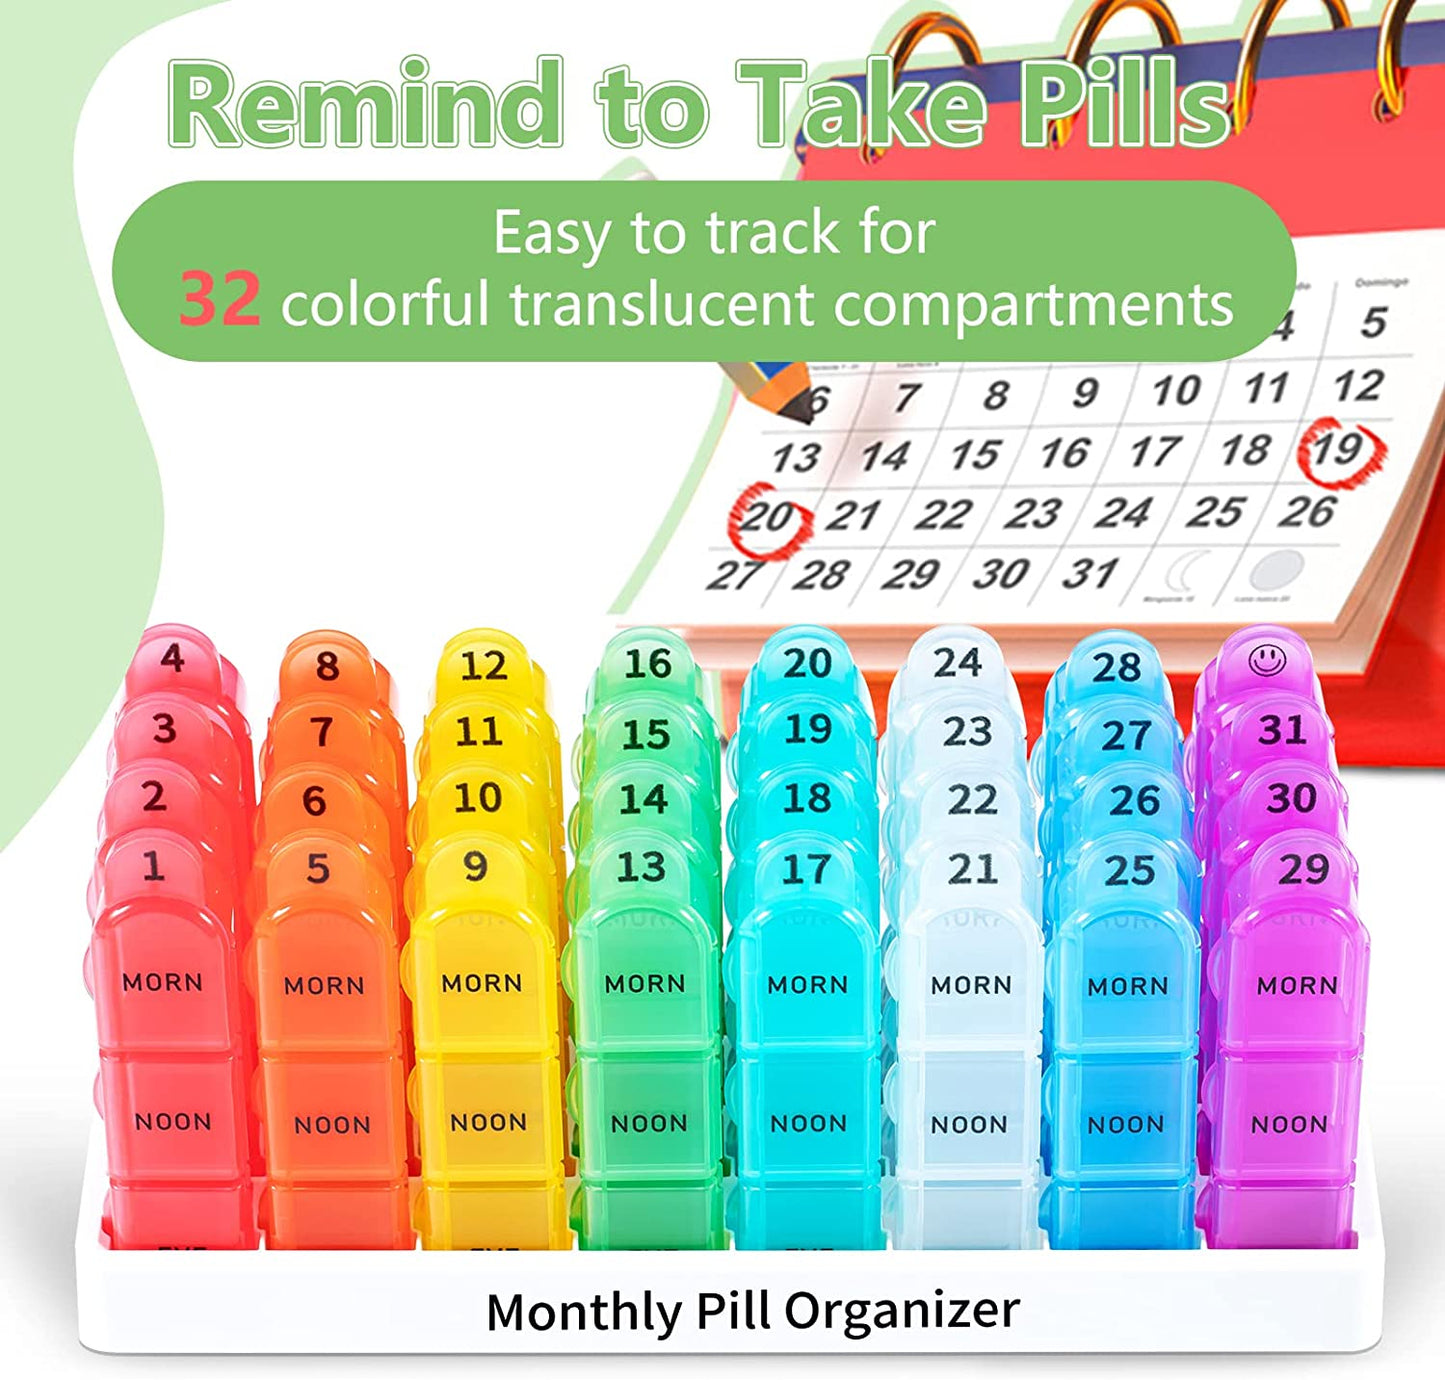 Monthly Pill Organizer 3 Times a Day